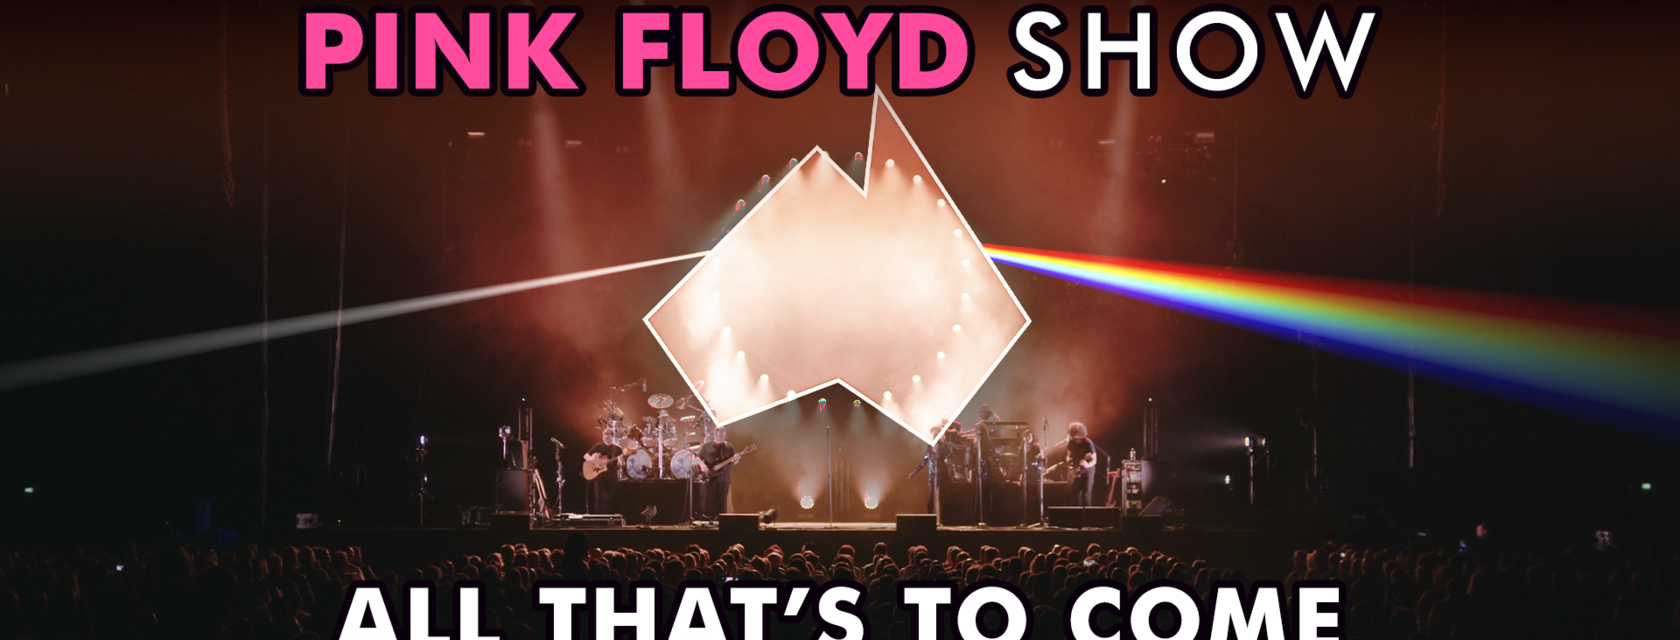 The Australian Pink Floyd Show at the Cogeco Amphitheater in 2022